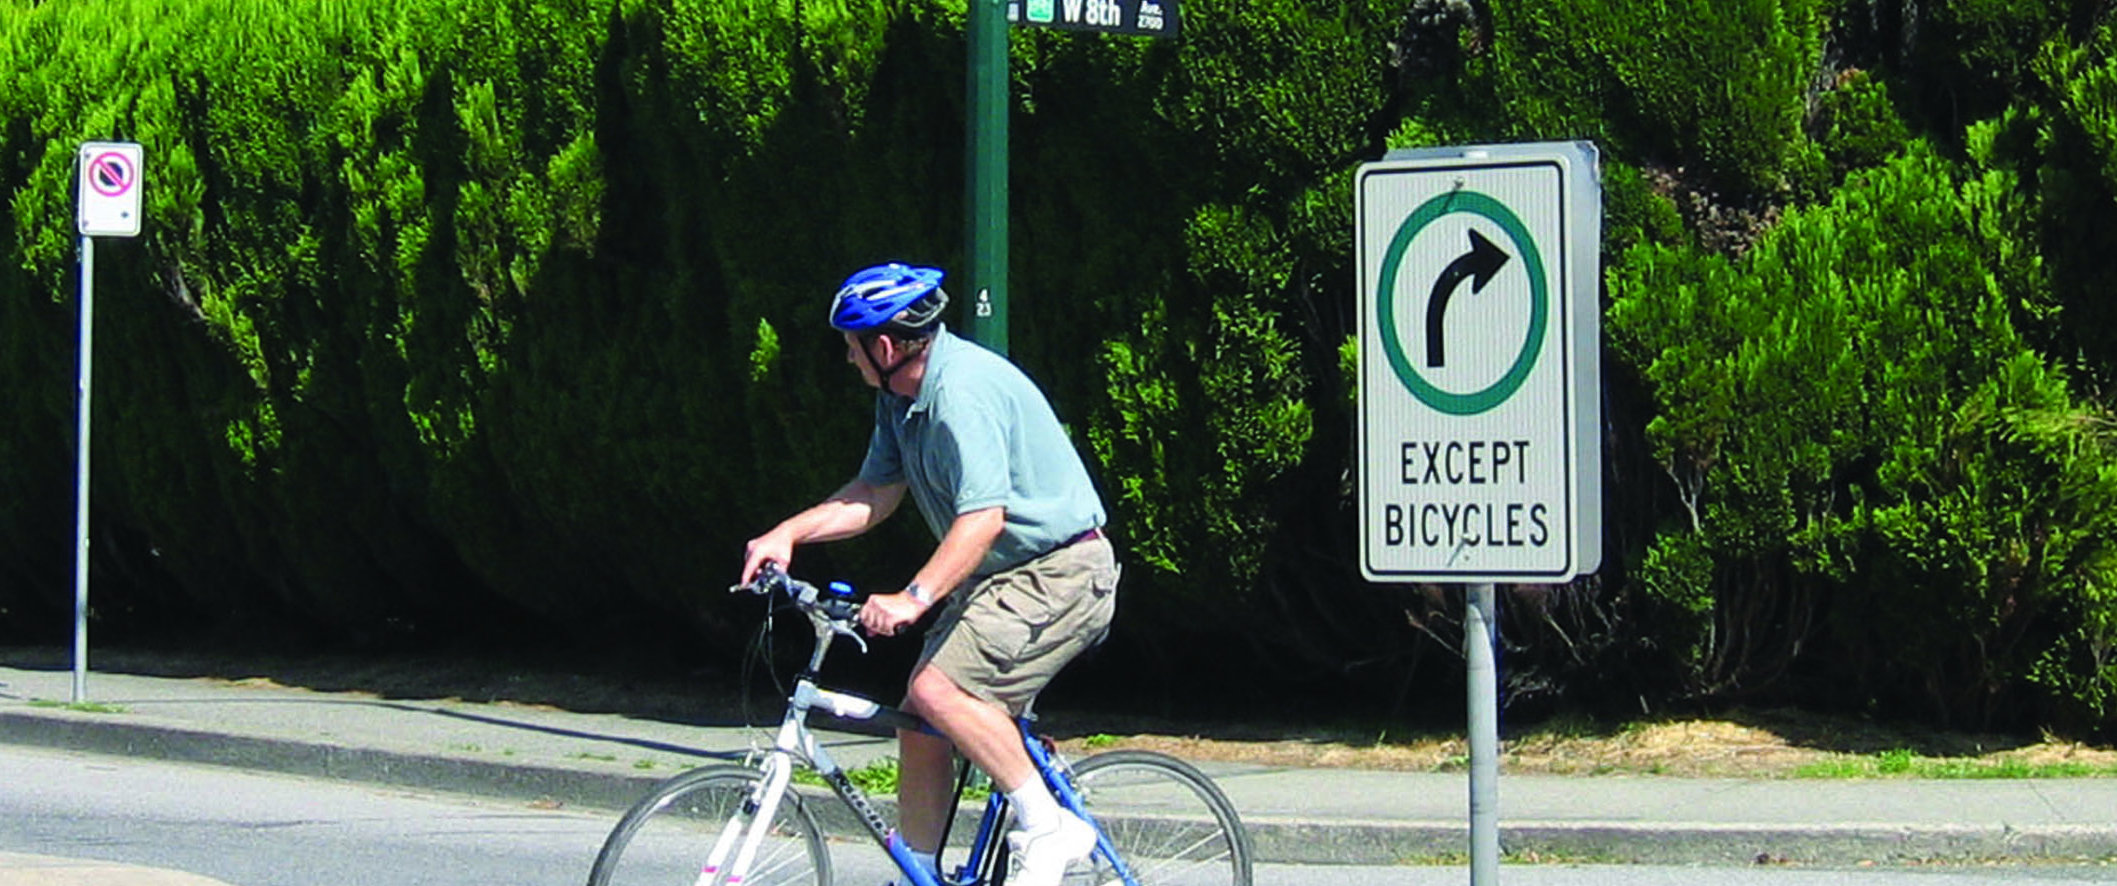 Where to Find Bike Lane Signs